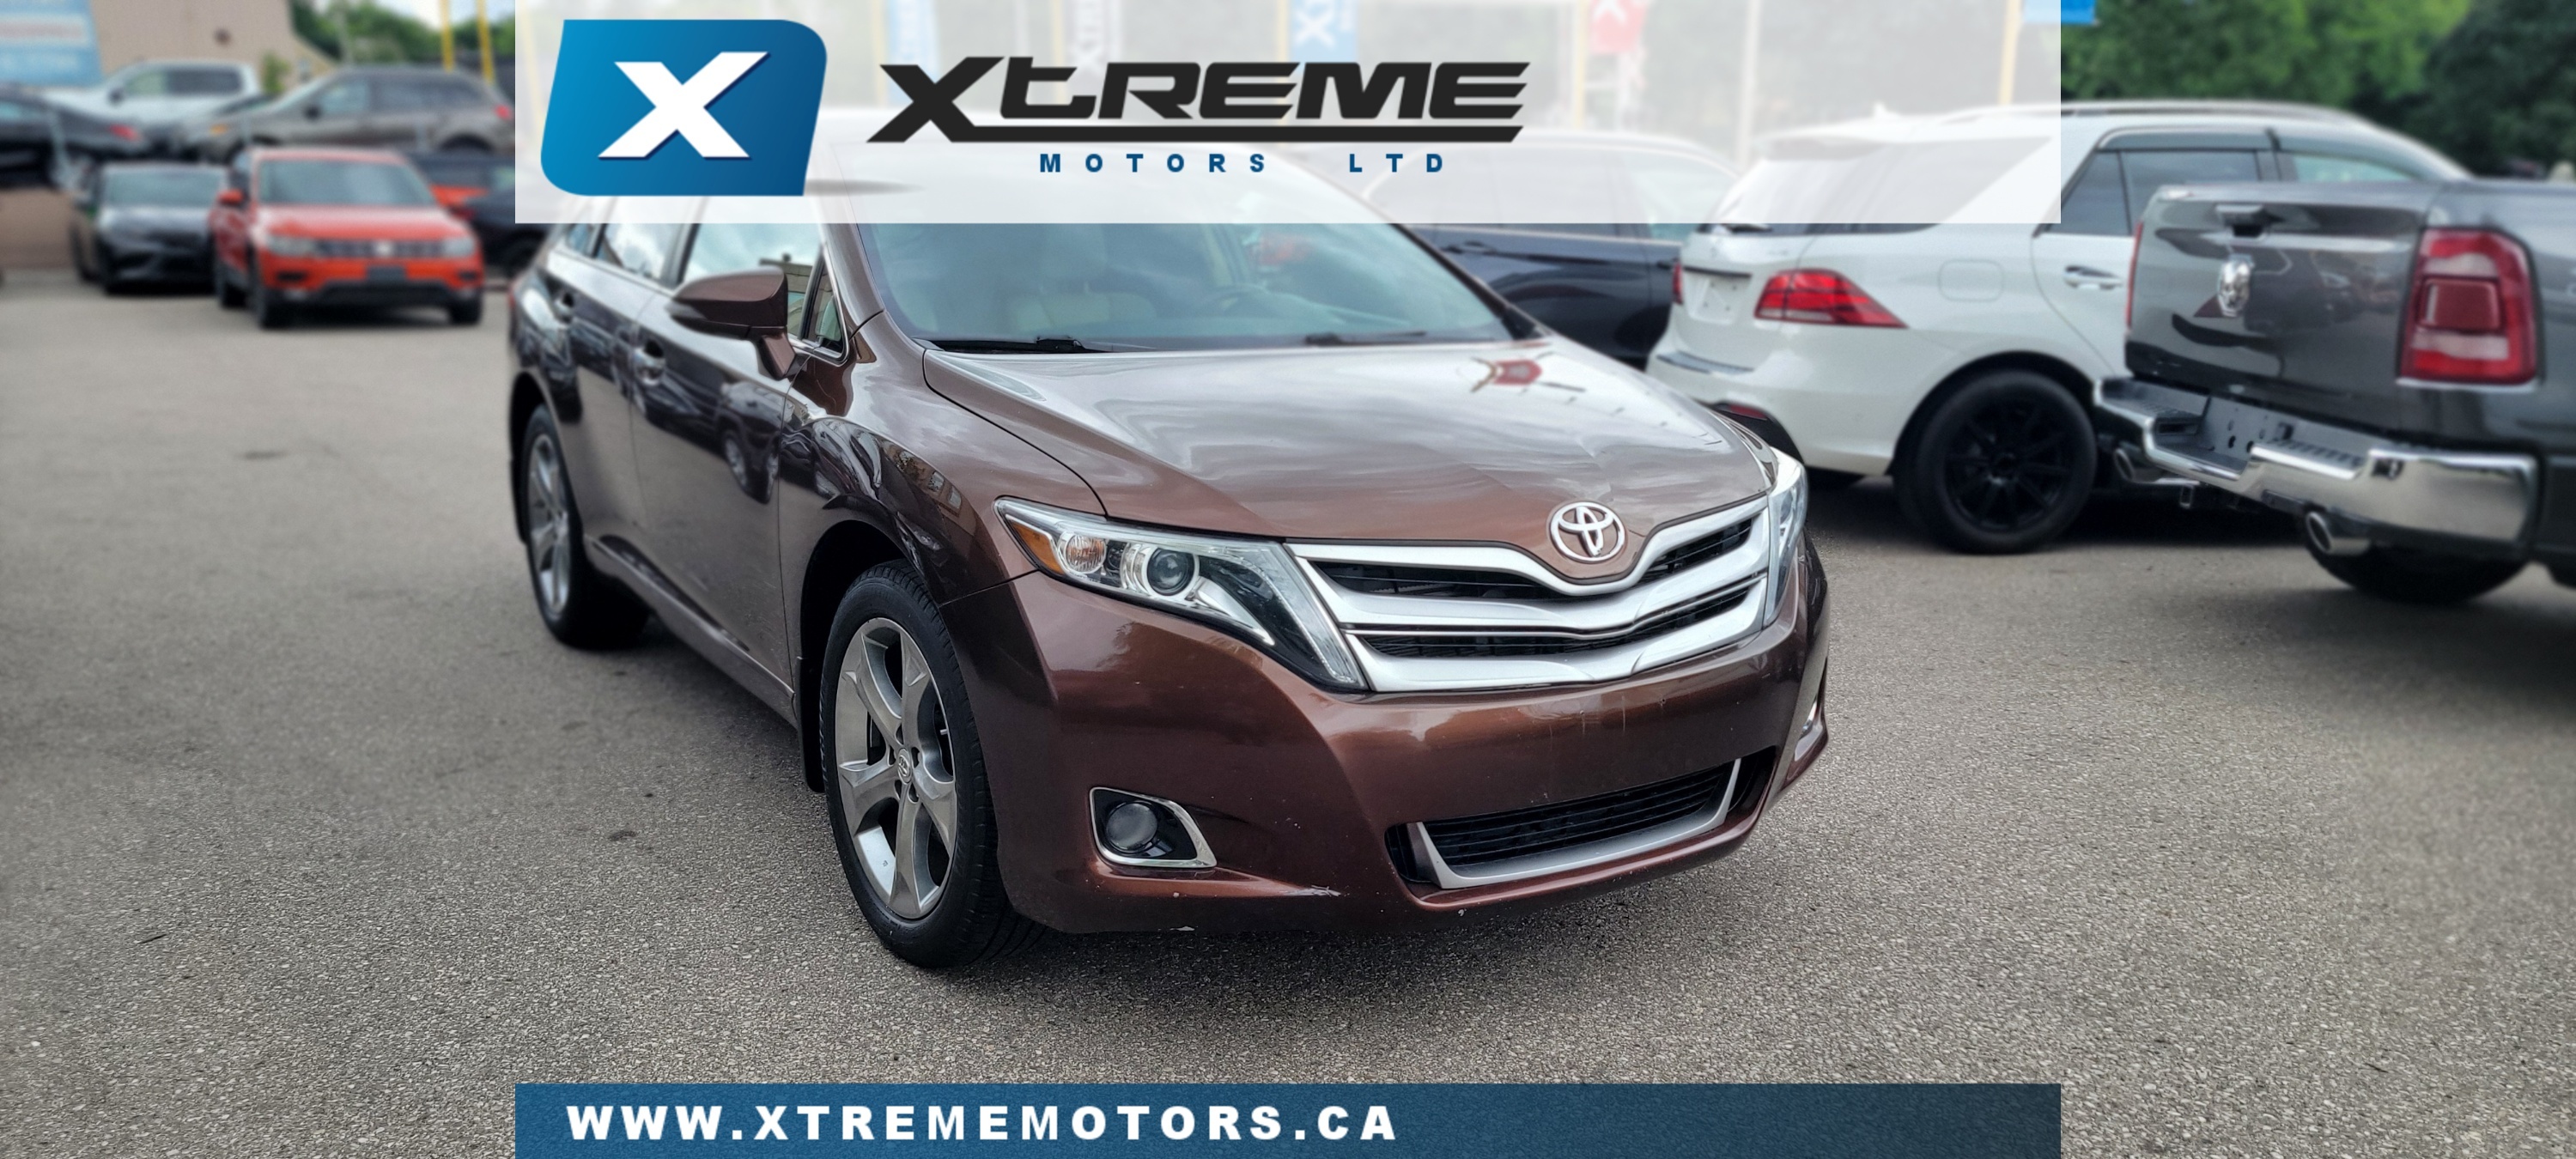 2014 Toyota Venza 4dr V6 AWD Limited 